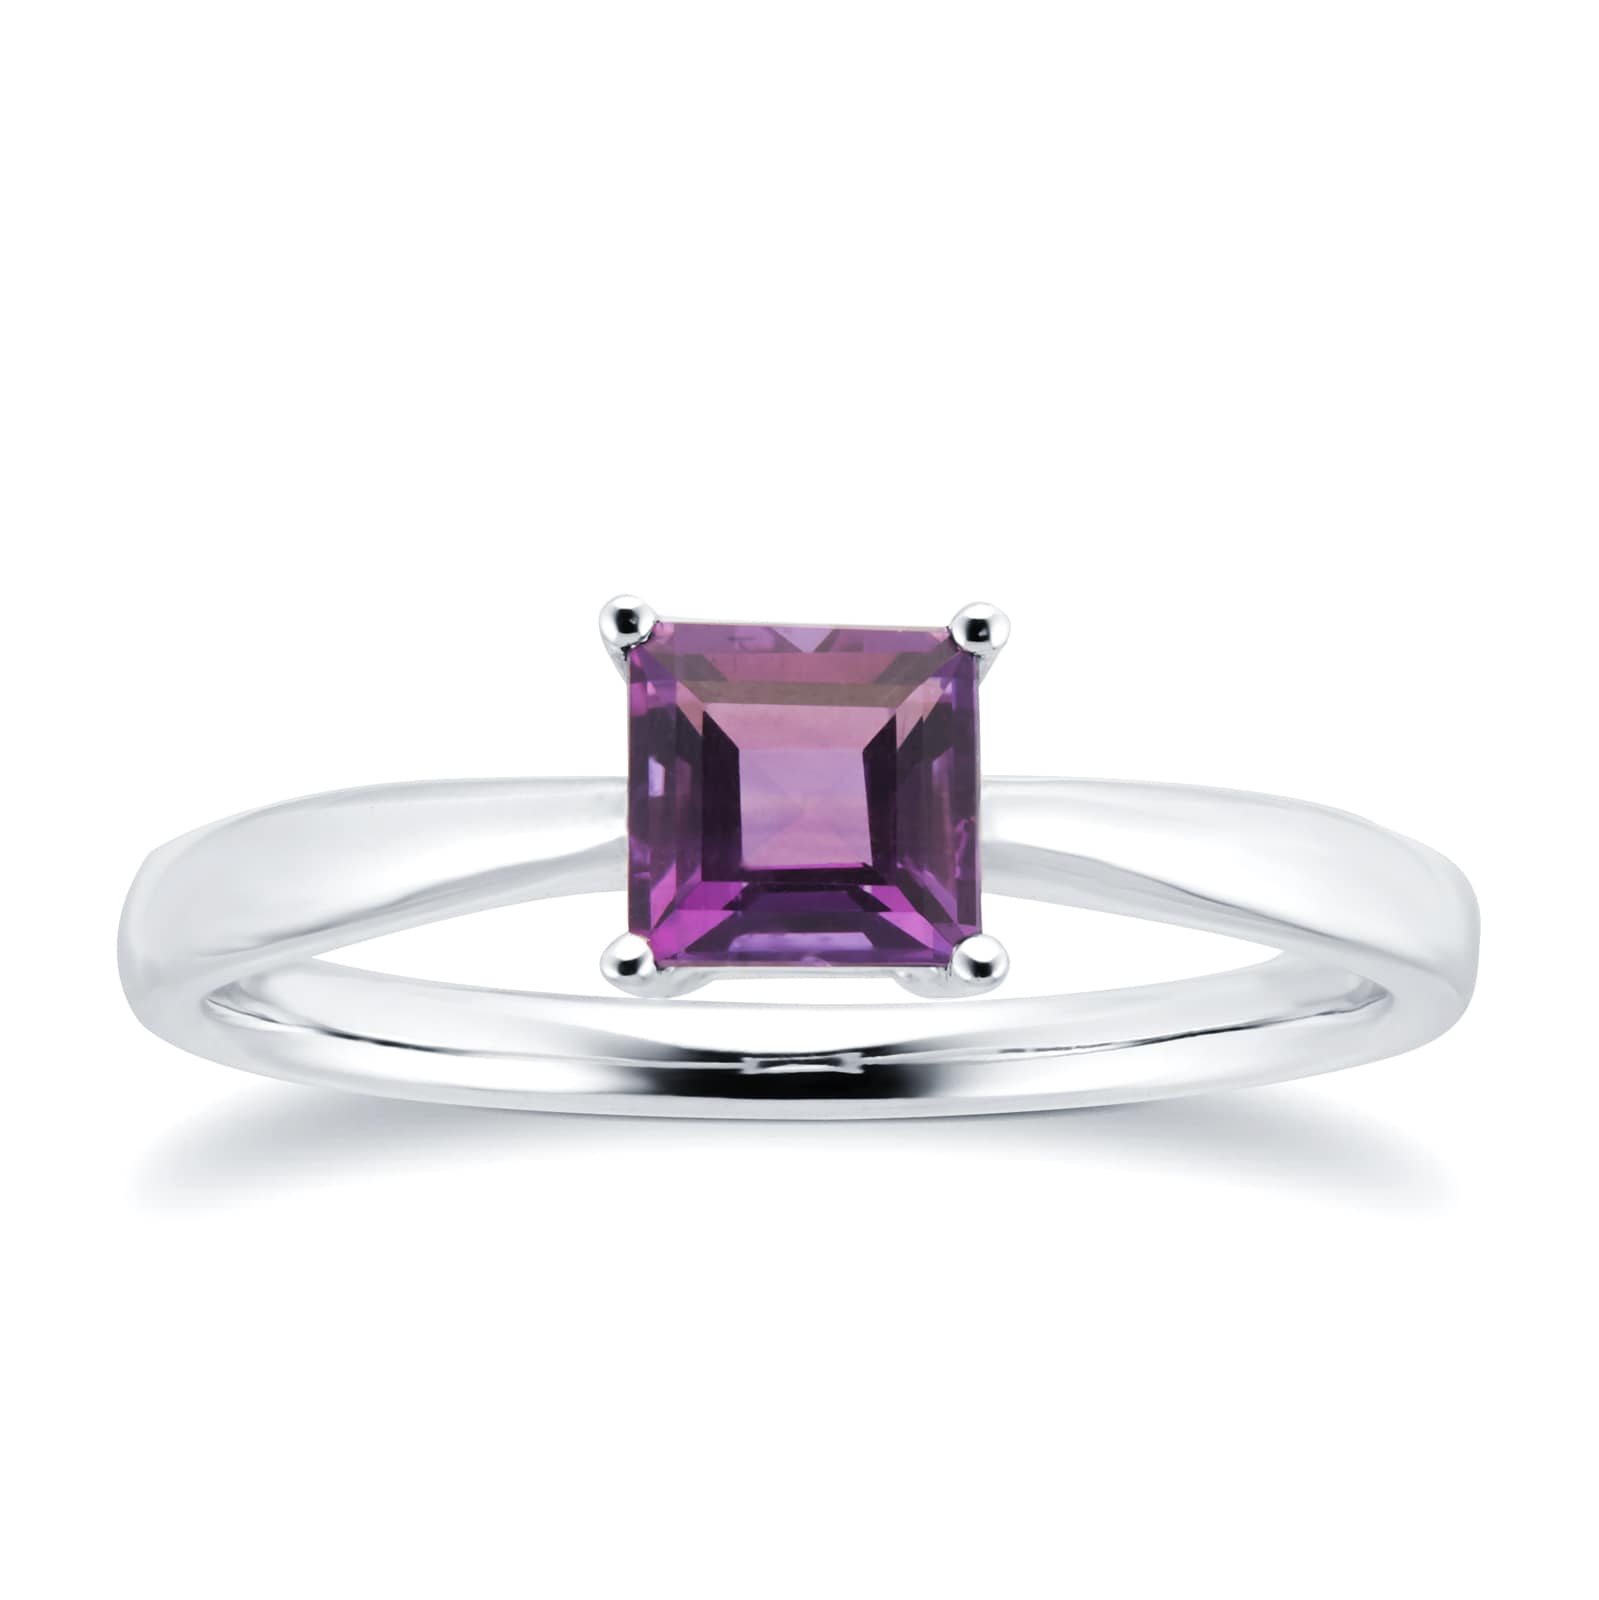 9ct White Gold 4 Claw Square Amethyst 5mm x 5mm Ring- Ring Size D.5